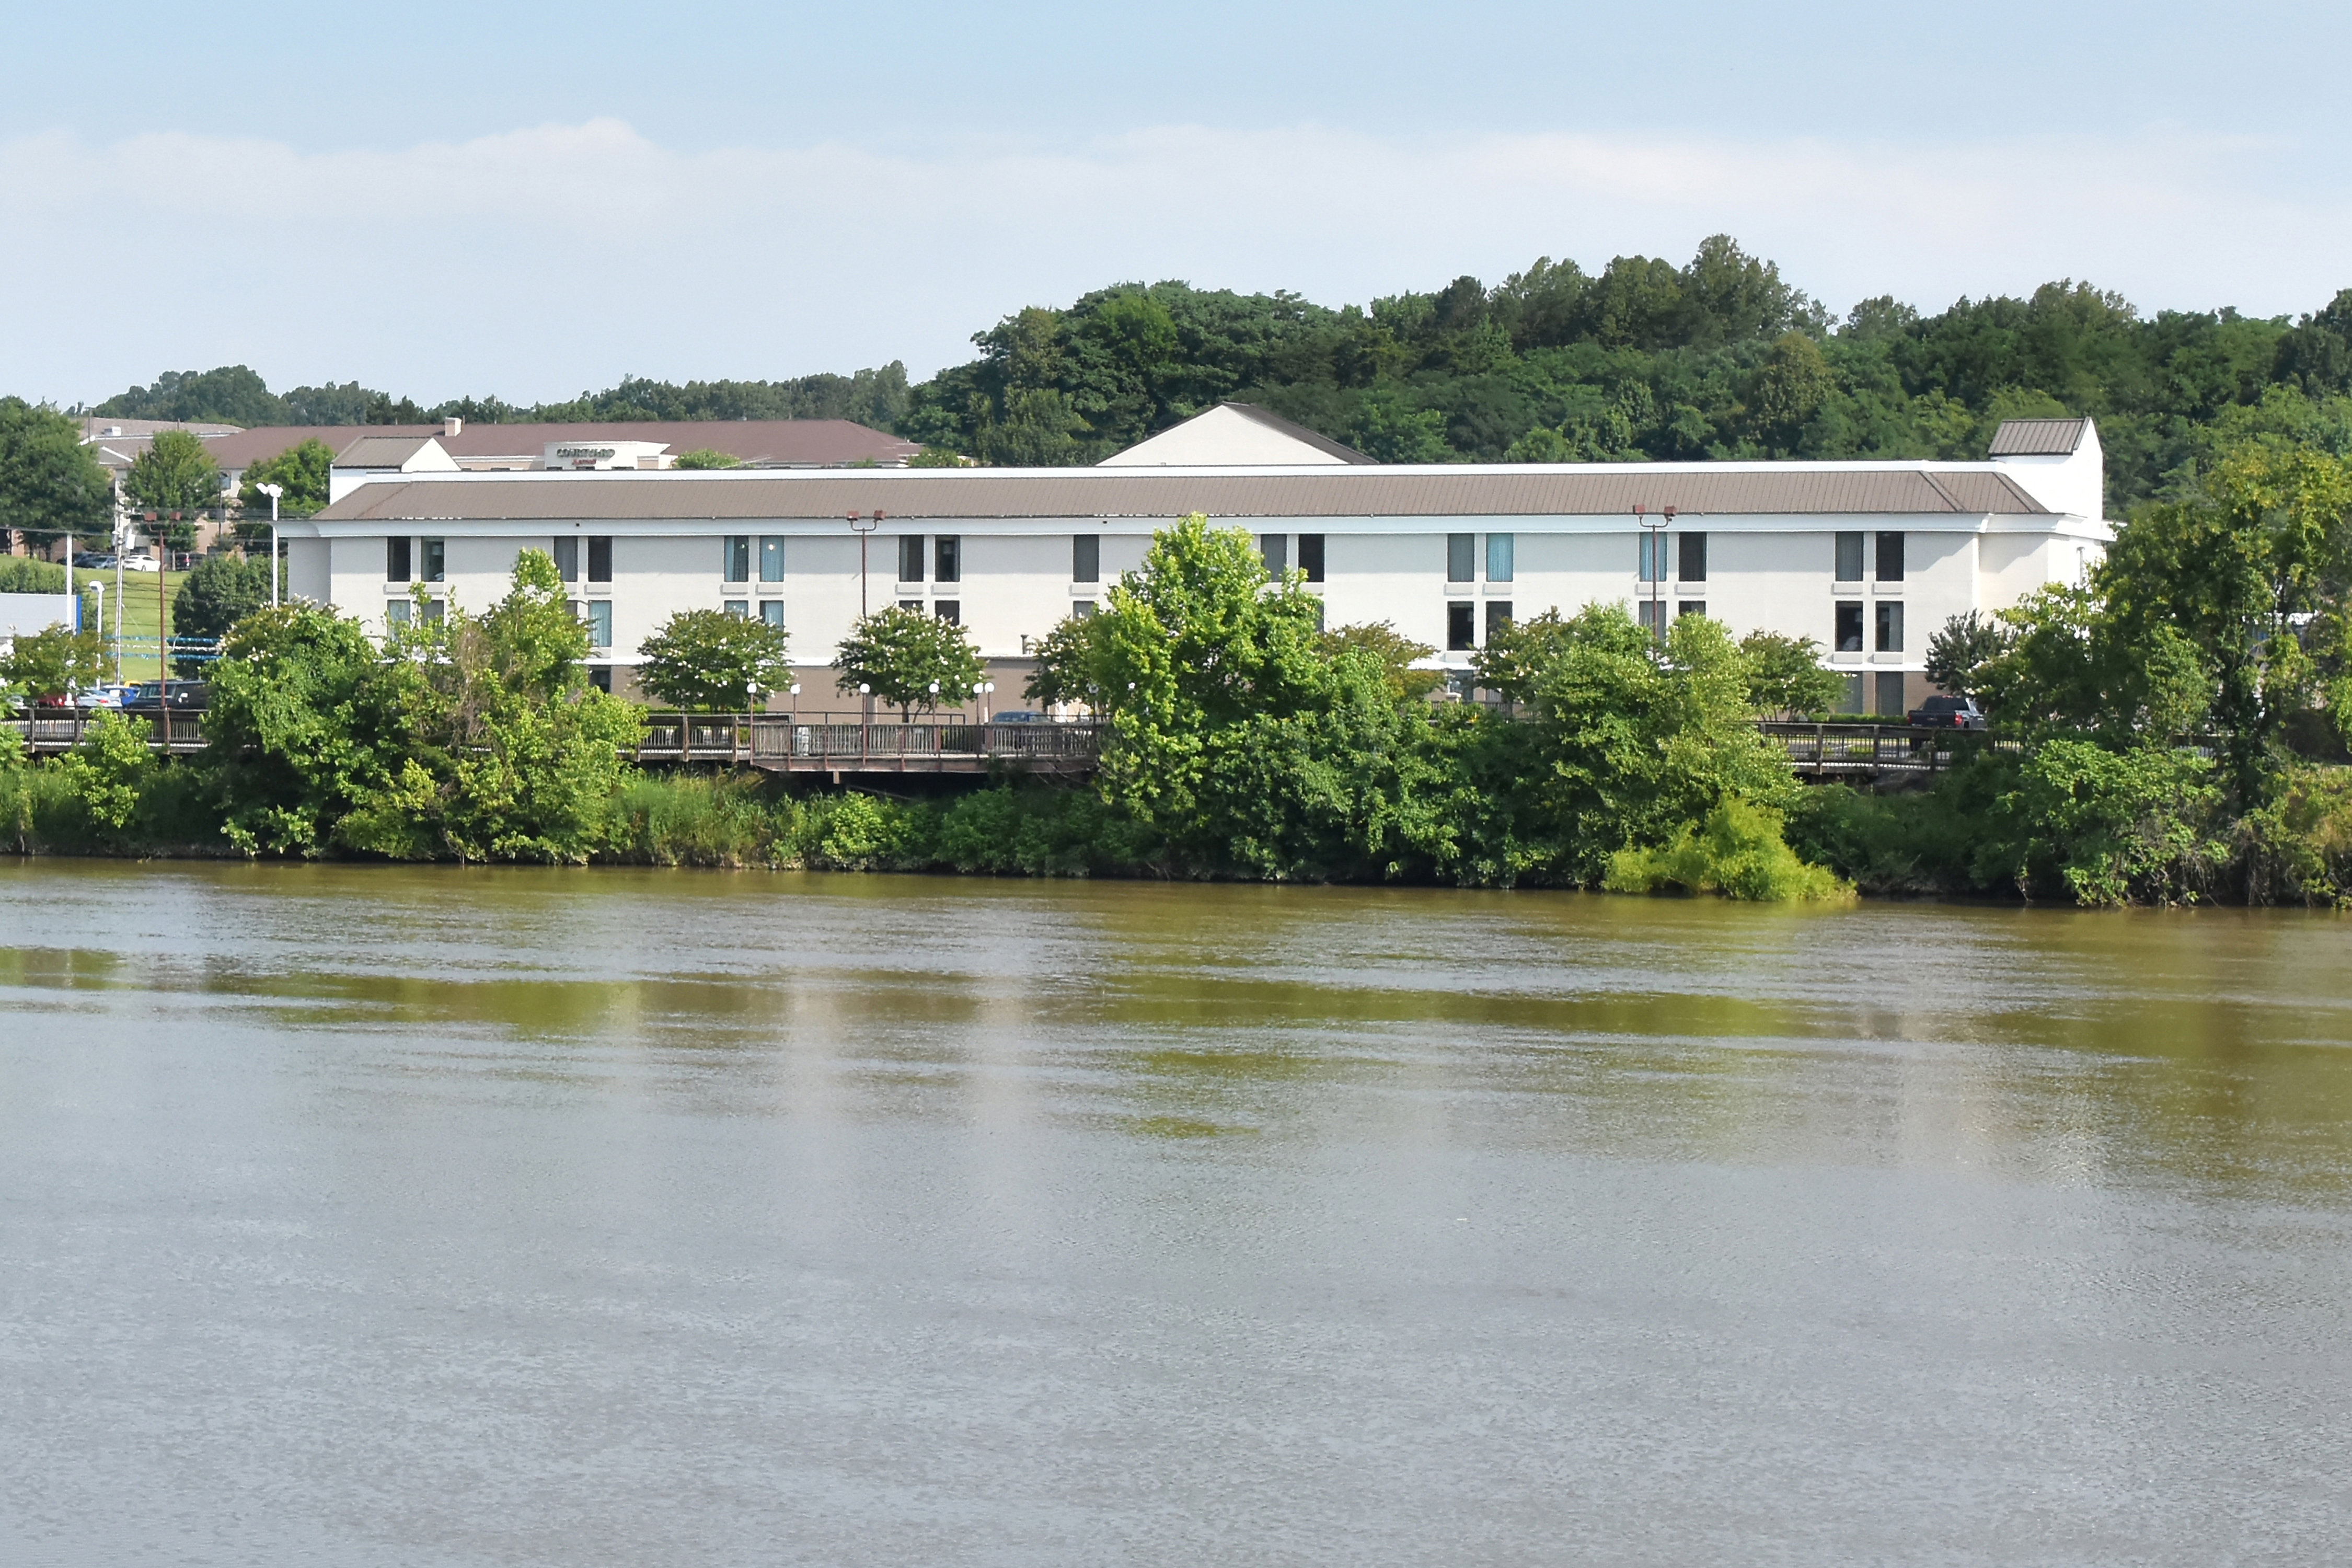 Stay at Danville, VA's only hotel with views of the Dan River.